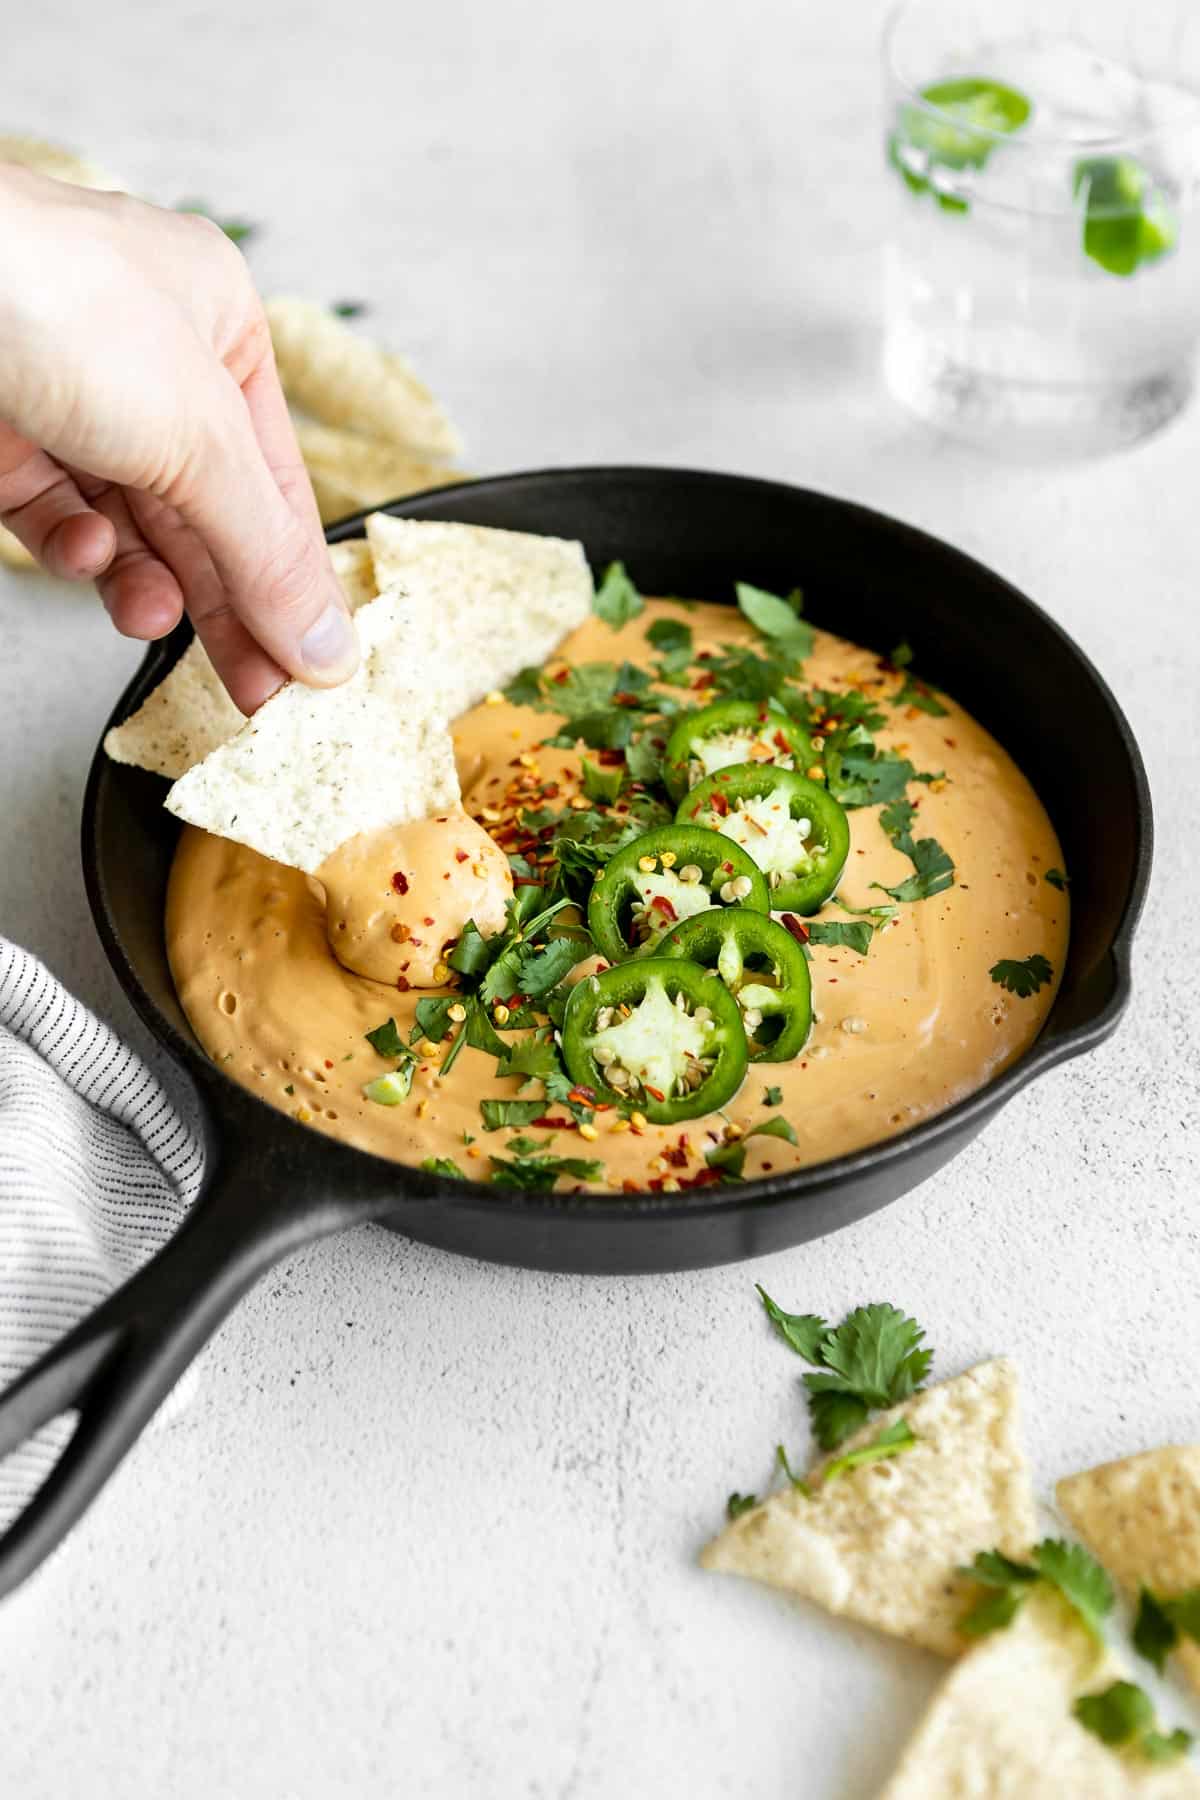 Dipping in a chip in the vegan cashew queso.